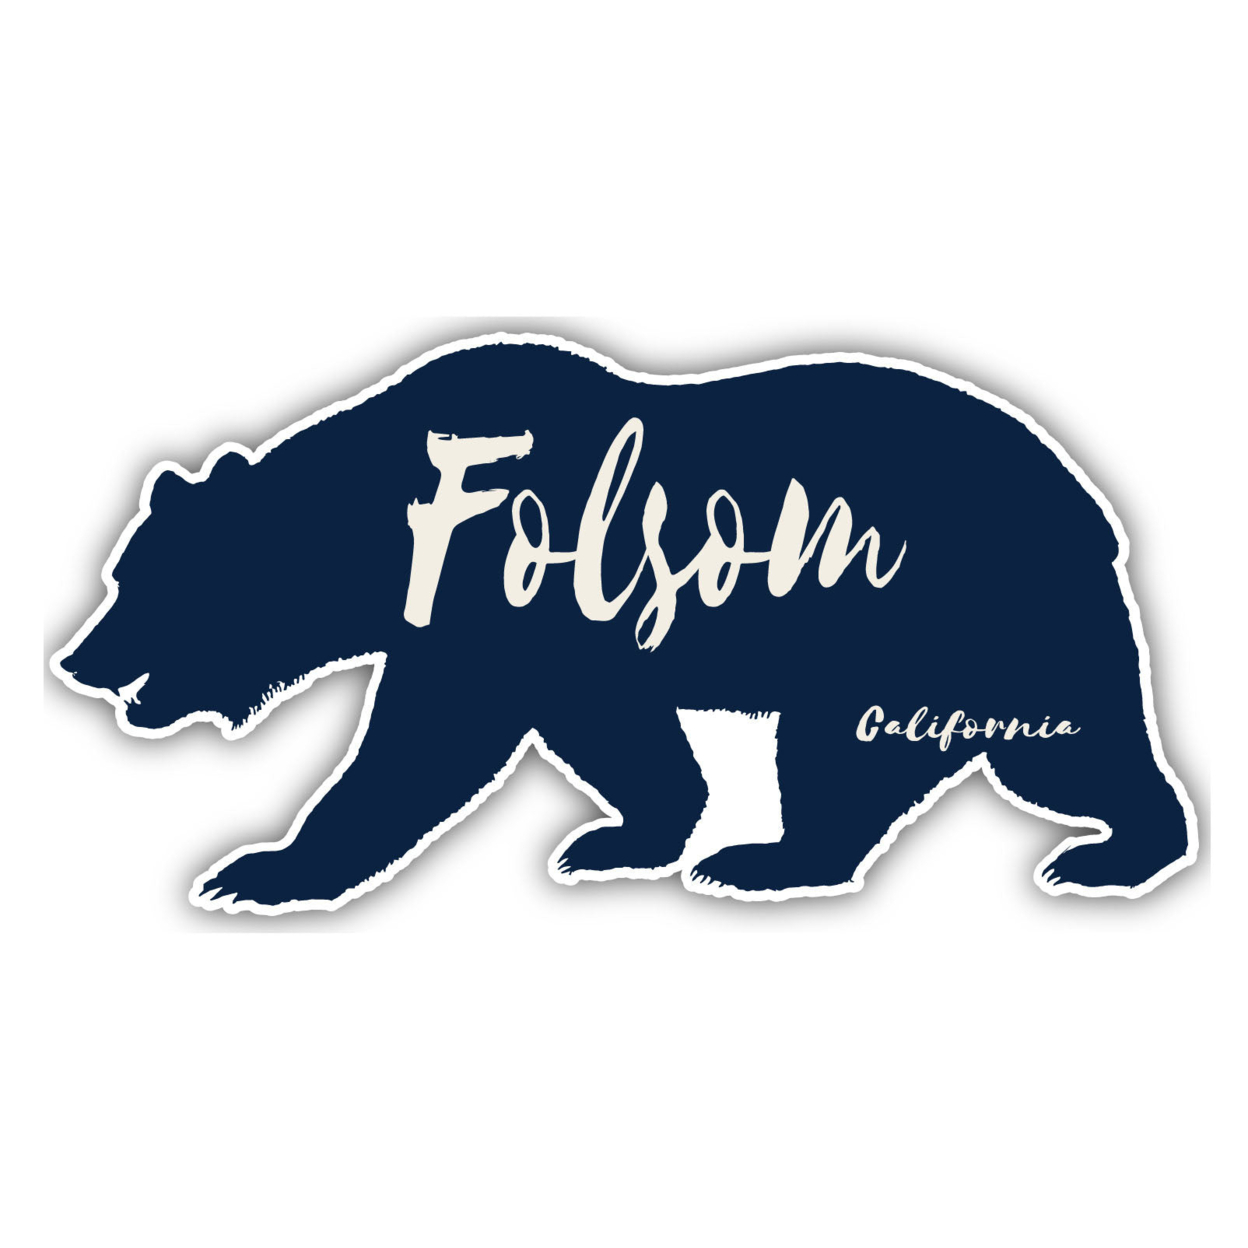 Folsom California Souvenir Decorative Stickers (Choose Theme And Size) - 4-Pack, 8-Inch, Camp Life